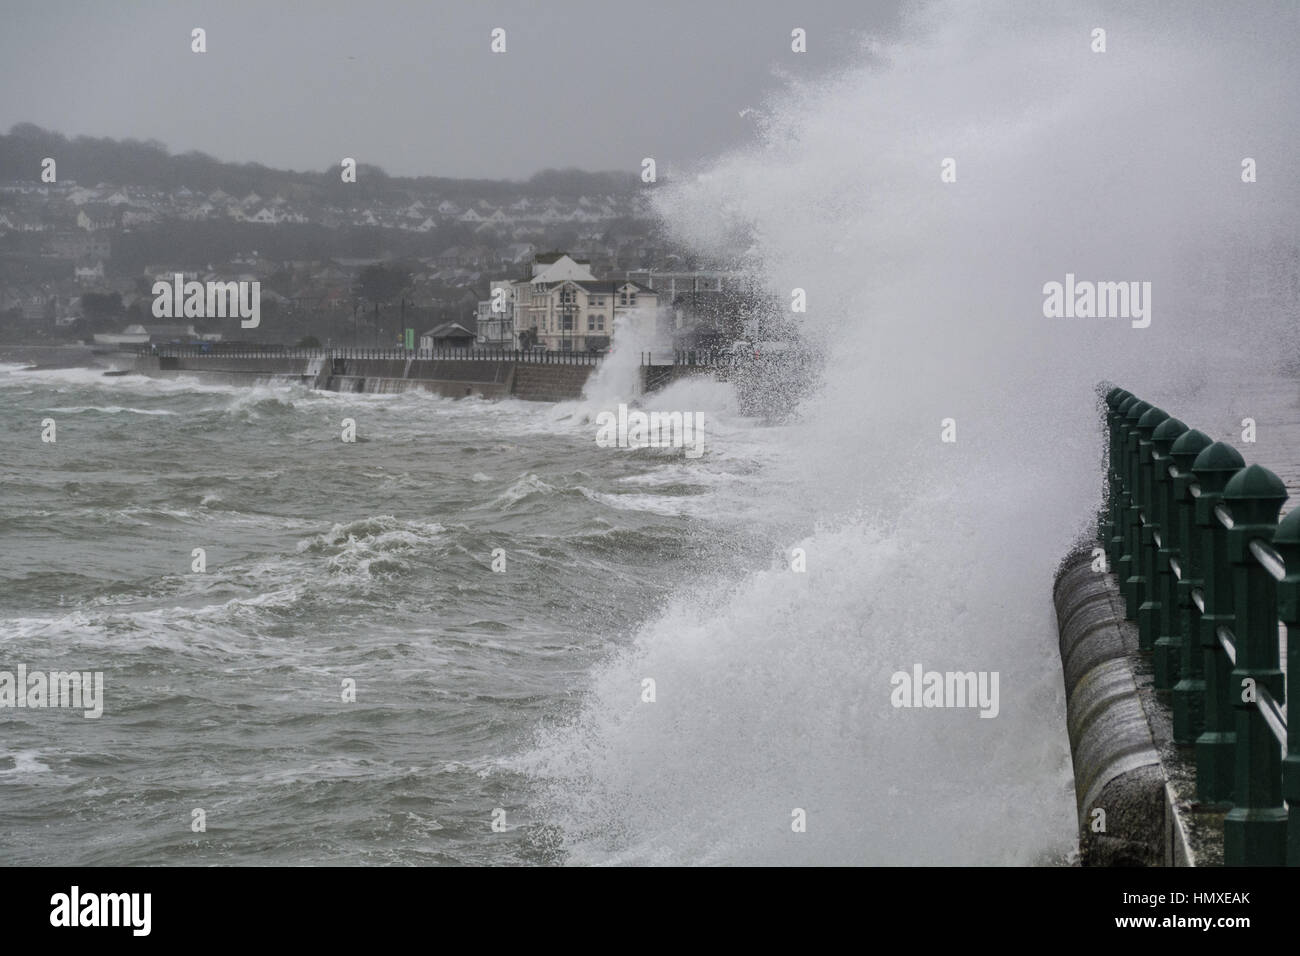 Penzance, Cornwall, UK. 6th Feb 2016. UK Weather. After last weeks storms, waves and strong wind return to Cornwall coastline. Seen here Penzance seafront. Credit: Simon Maycock/Alamy Live News Stock Photo